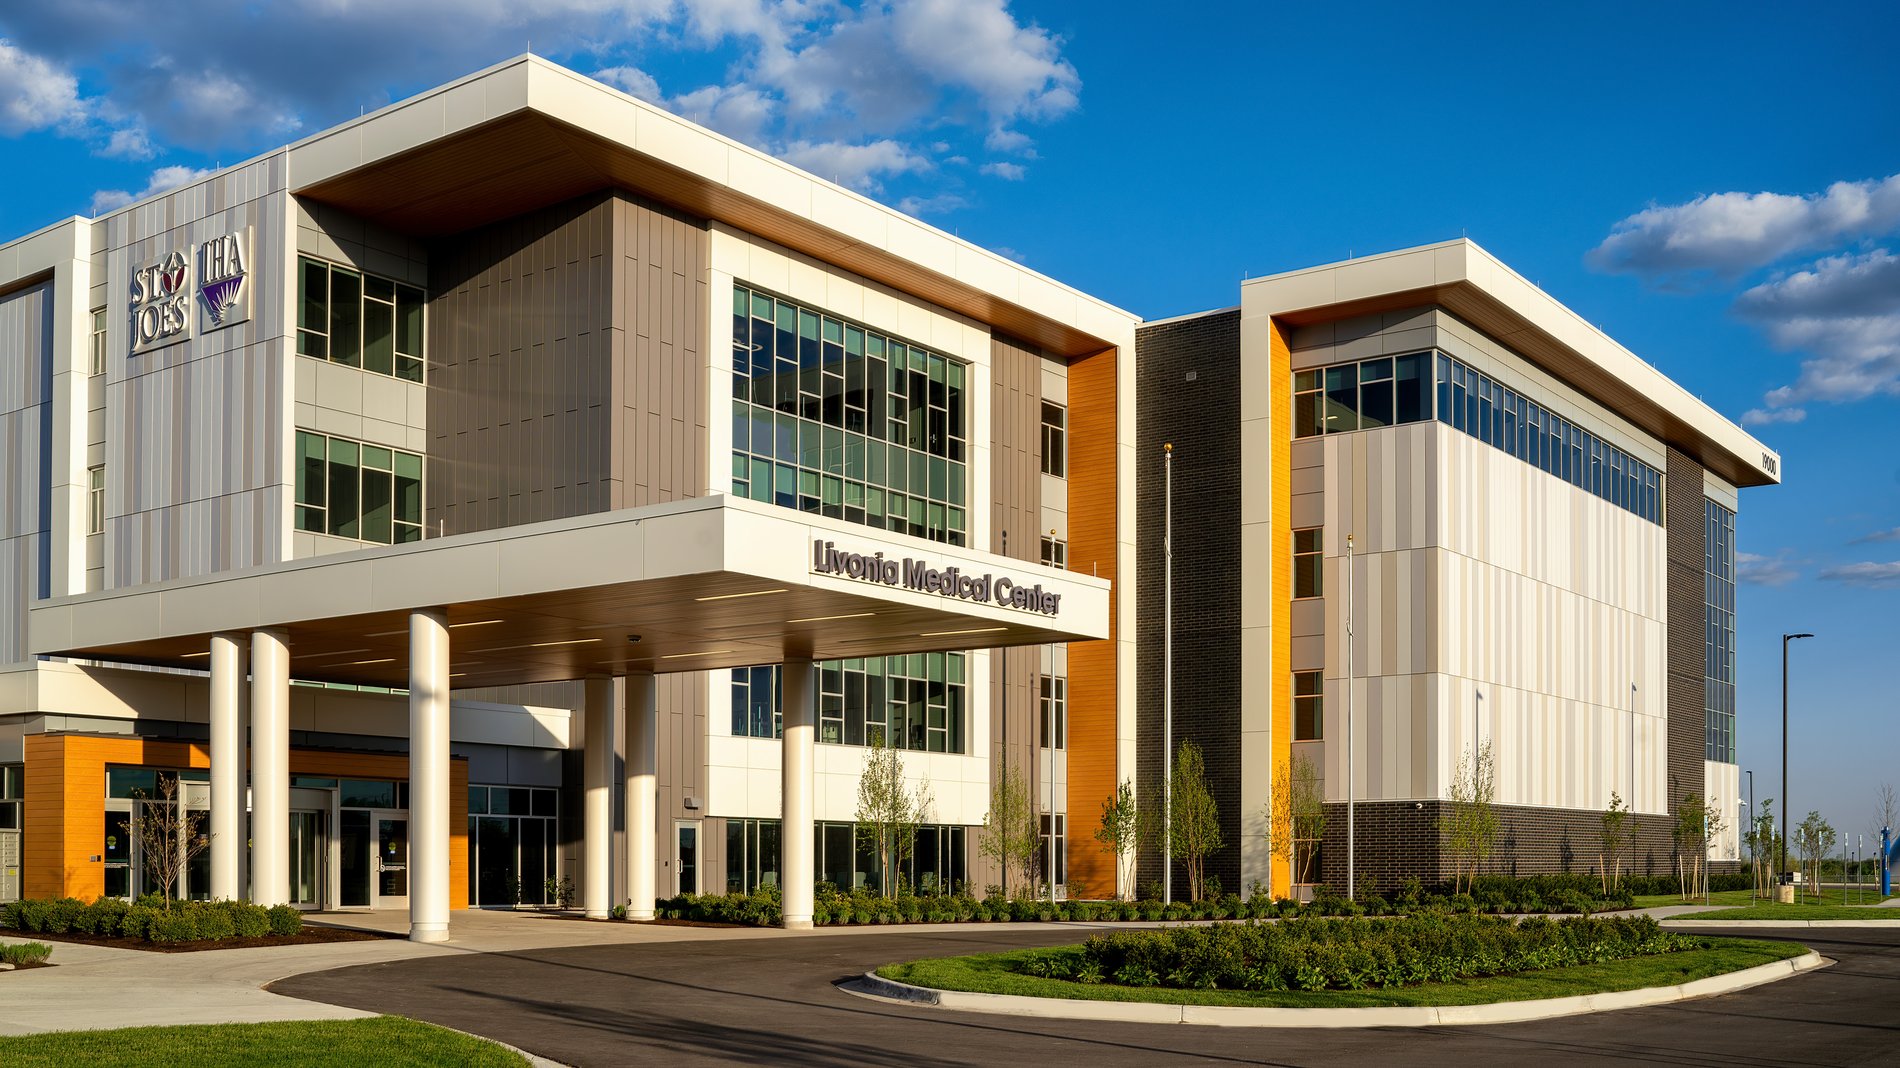 Trinity Health IHA Medical Group, Podiatry - Schoolcraft Campus is located in the Livonia Medical Center.